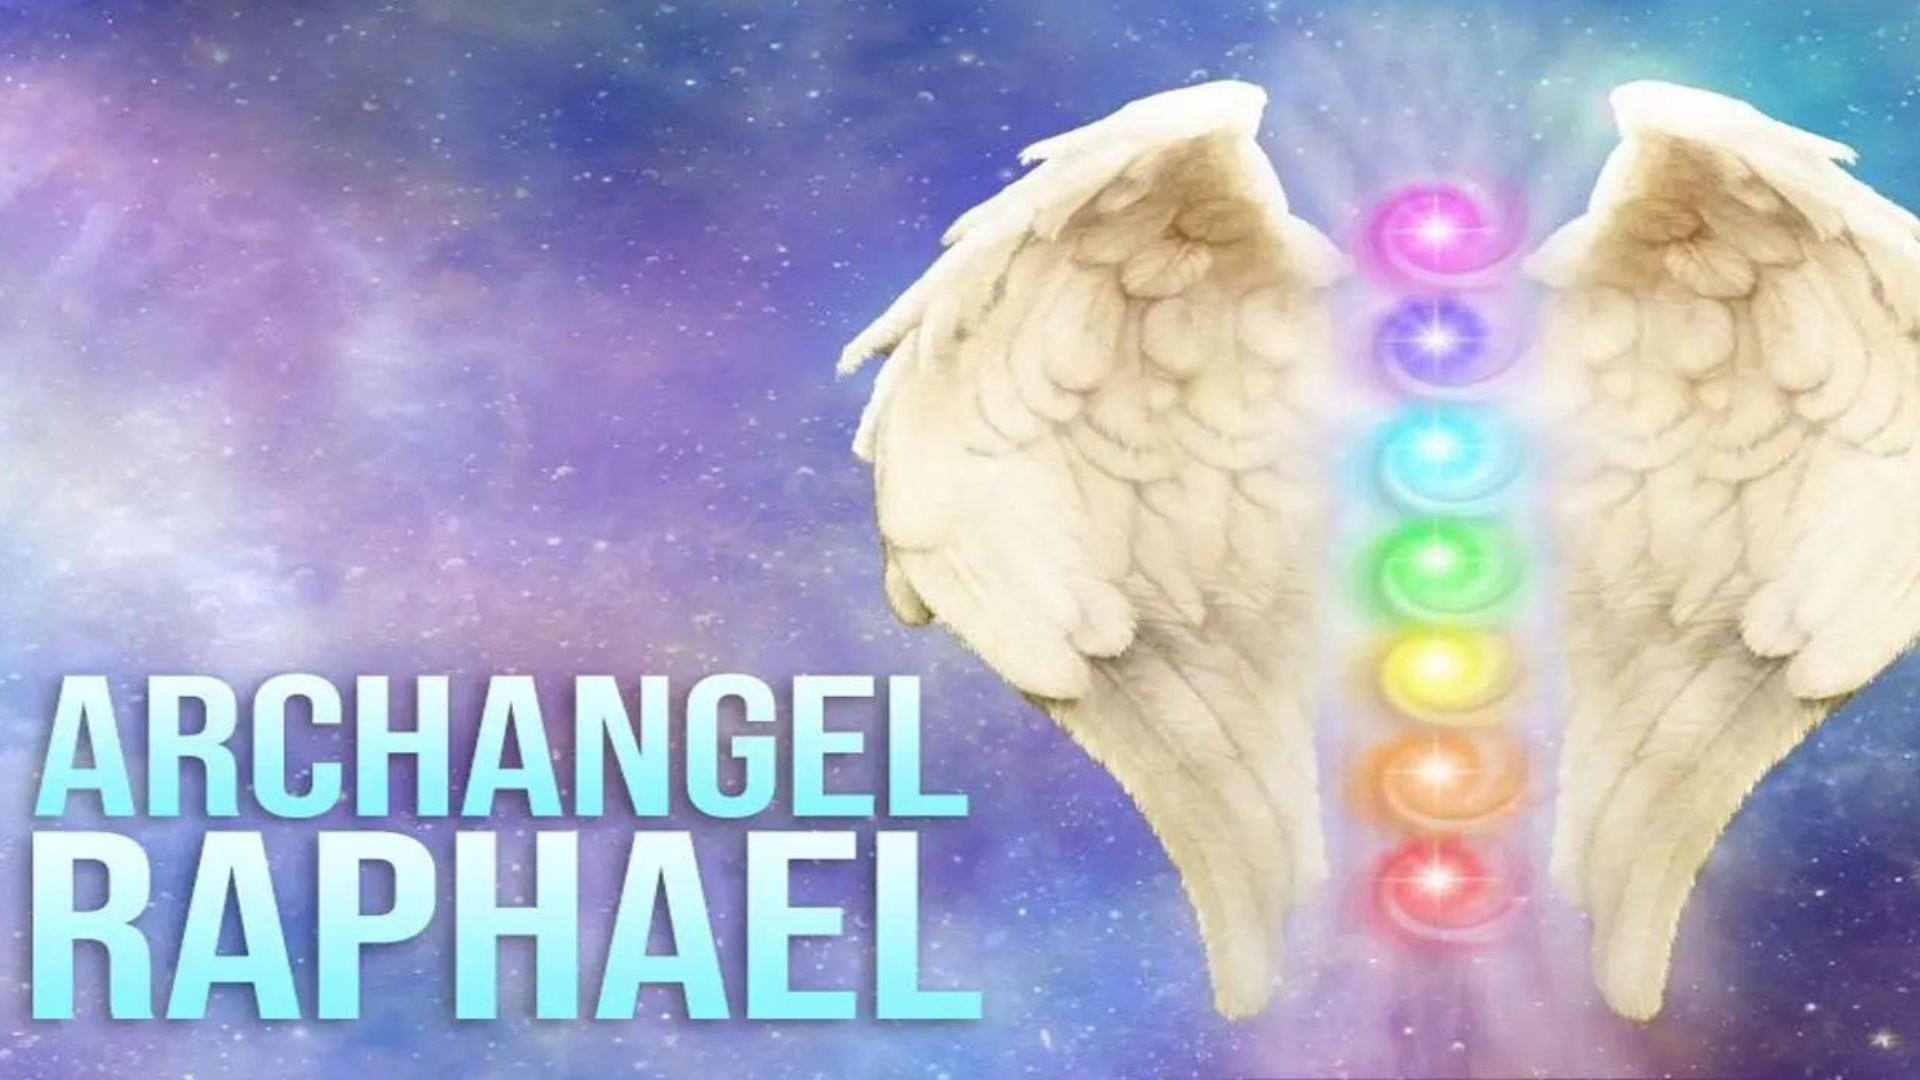 Angel wings with colorful lights and words Archangel Raphael